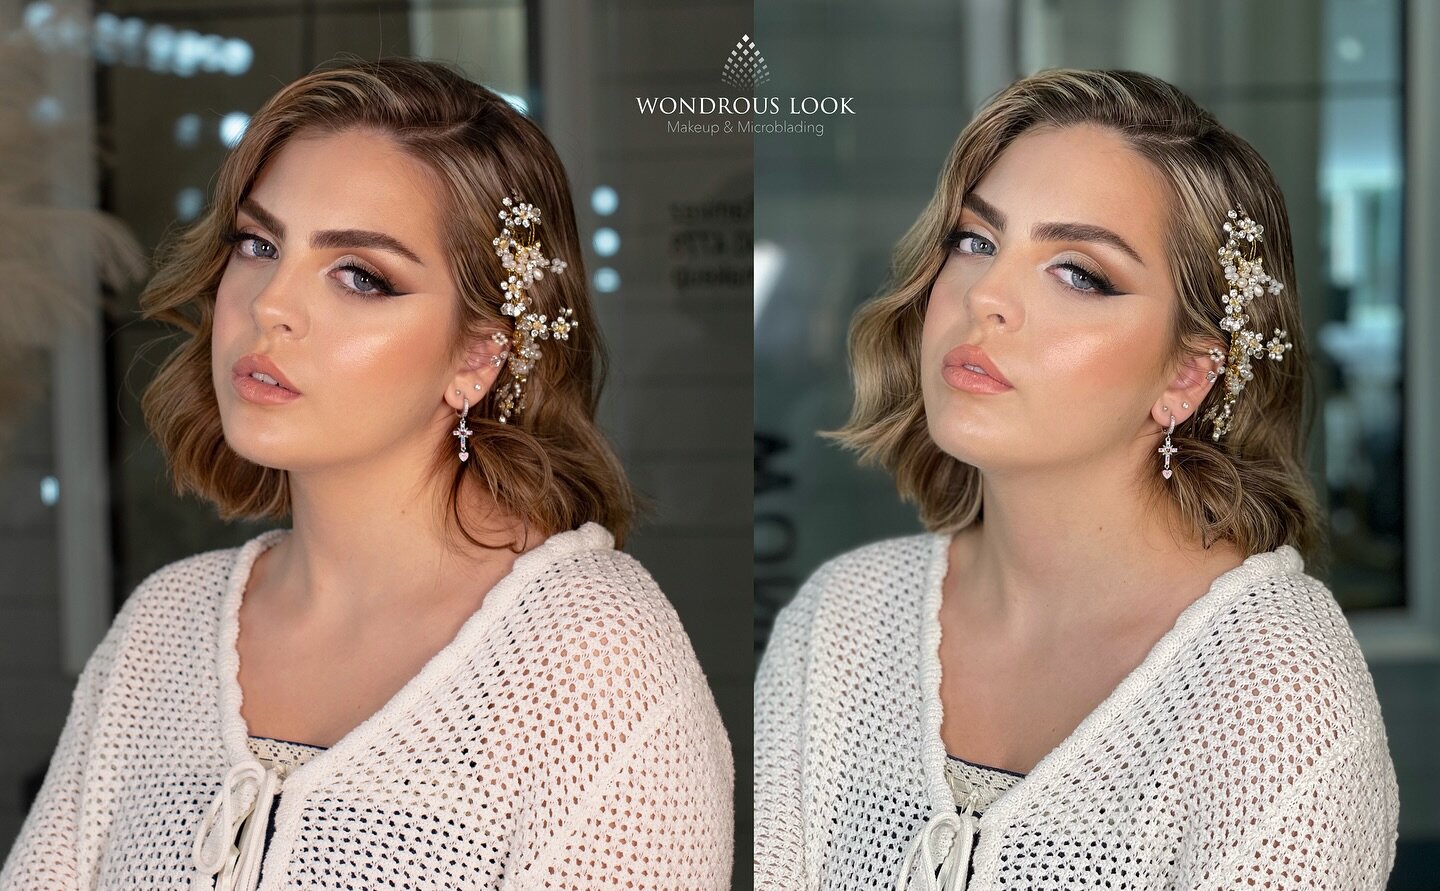 Can you see the difference in these pictures?
-Left side I used camera pro Nikon D610 with lense 50mm prime #nikonphotography 
- Right side IPhone 12 Pro Max ultra #iphonephotography 
Bridal and hair services @wondrouslookmakeup 
Thanks our model @mi